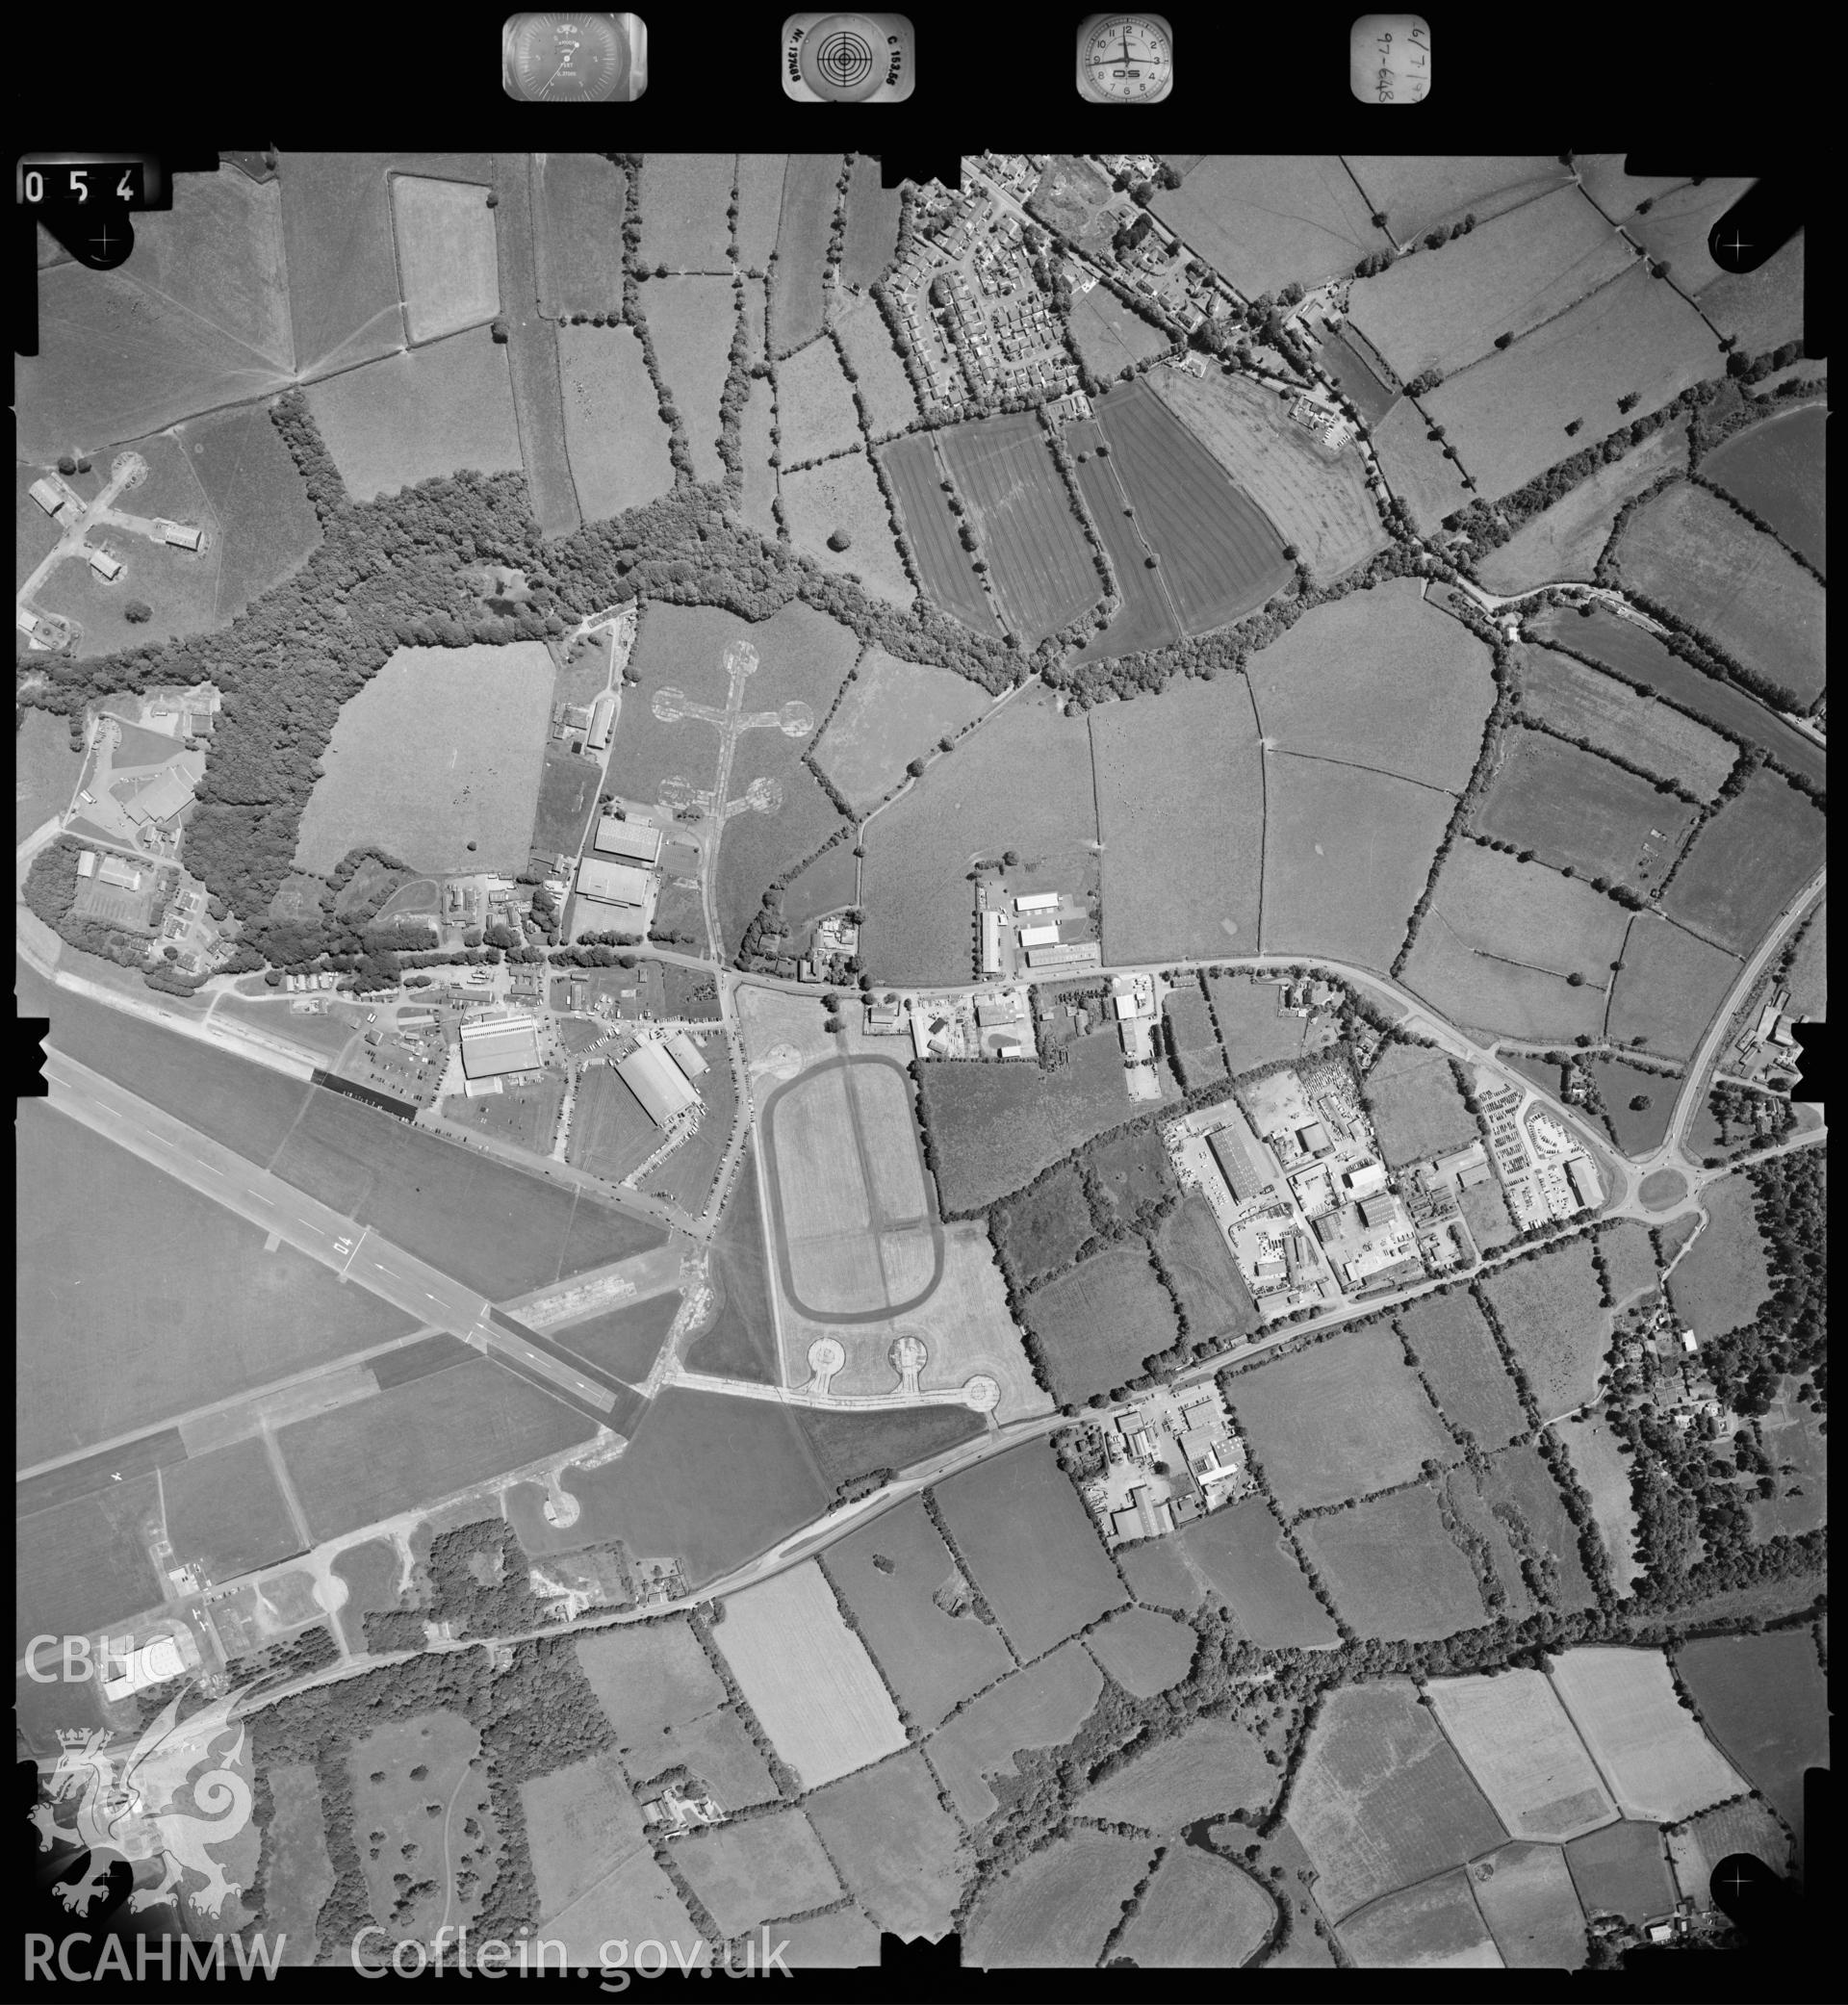 Digitized copy of an aerial photograph showing Withybush Airfield, taken by Ordnance Survey, 1998.